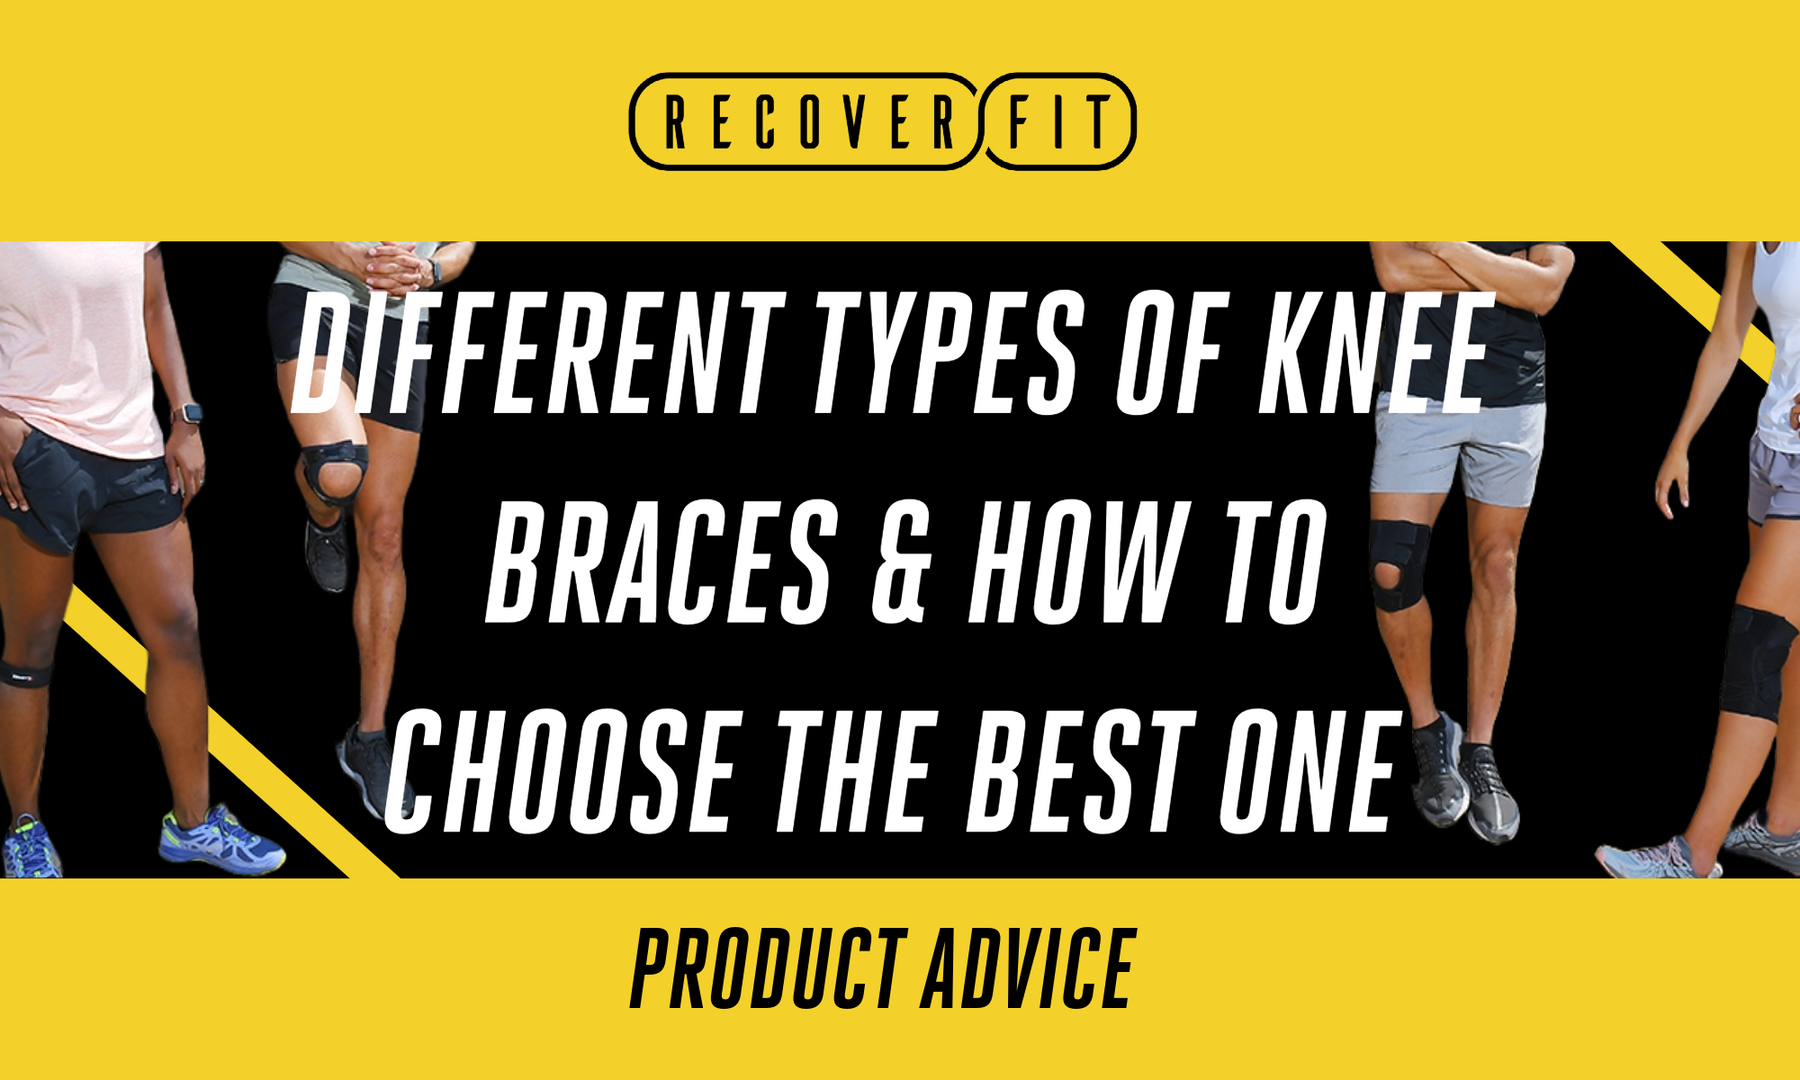 Knee Brace 101: Different types of knee braces and how to choose the best one